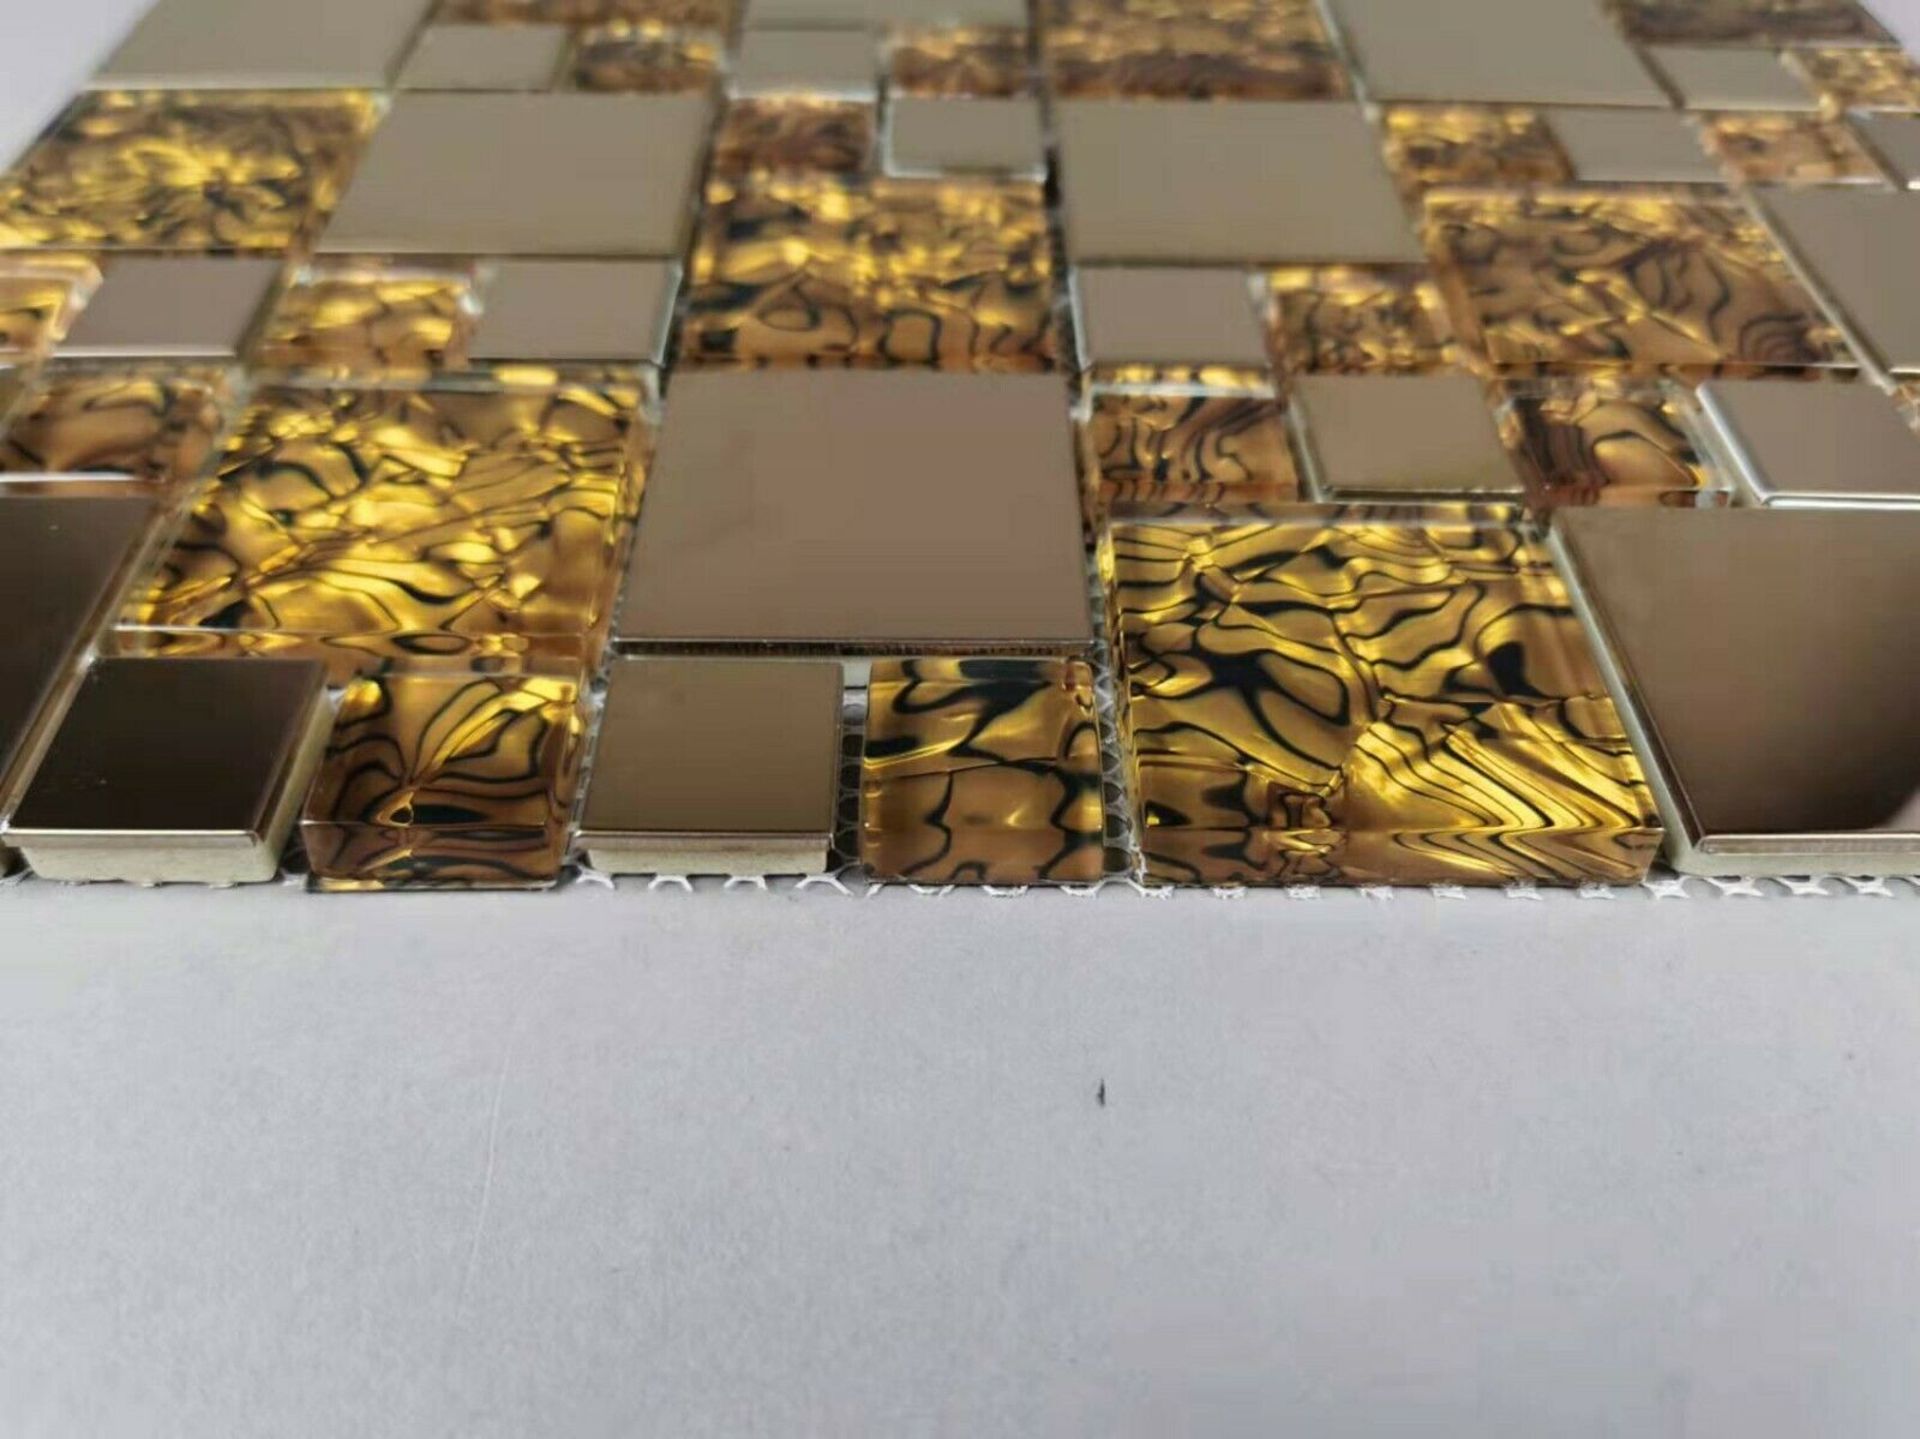 2 Square Metres-High Quality Glass/Stainless Steel Mosaic Tiles - Image 4 of 4